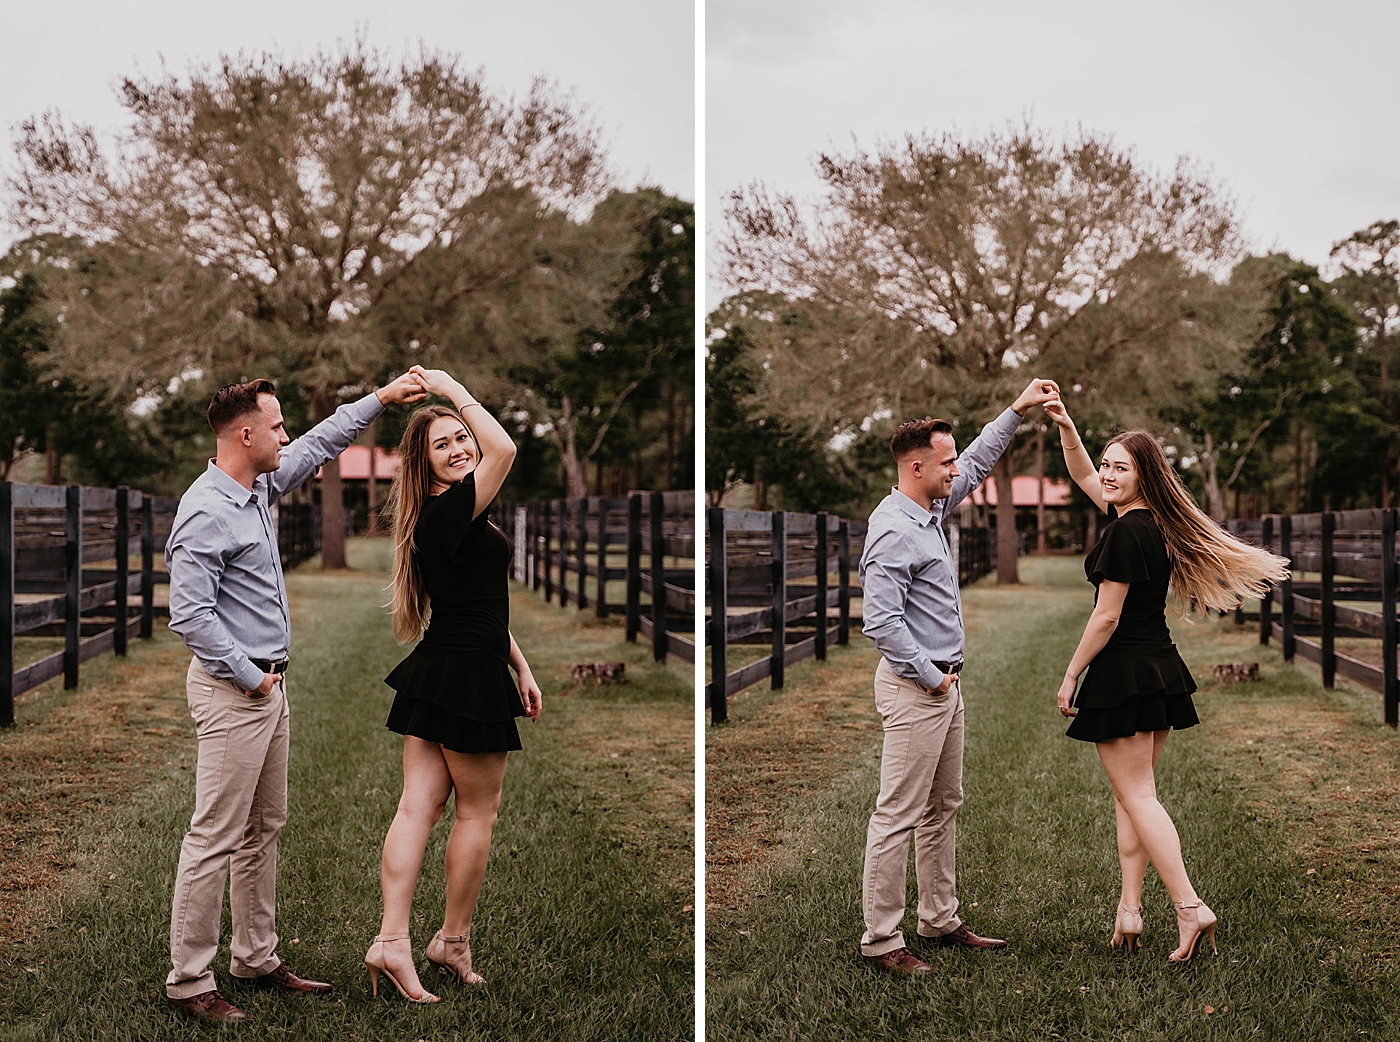 Couple pirouetting on grassy field Rustic South Florida Engagement Photography captured by South Florida Engagement Photographer Krystal Capone Photography 